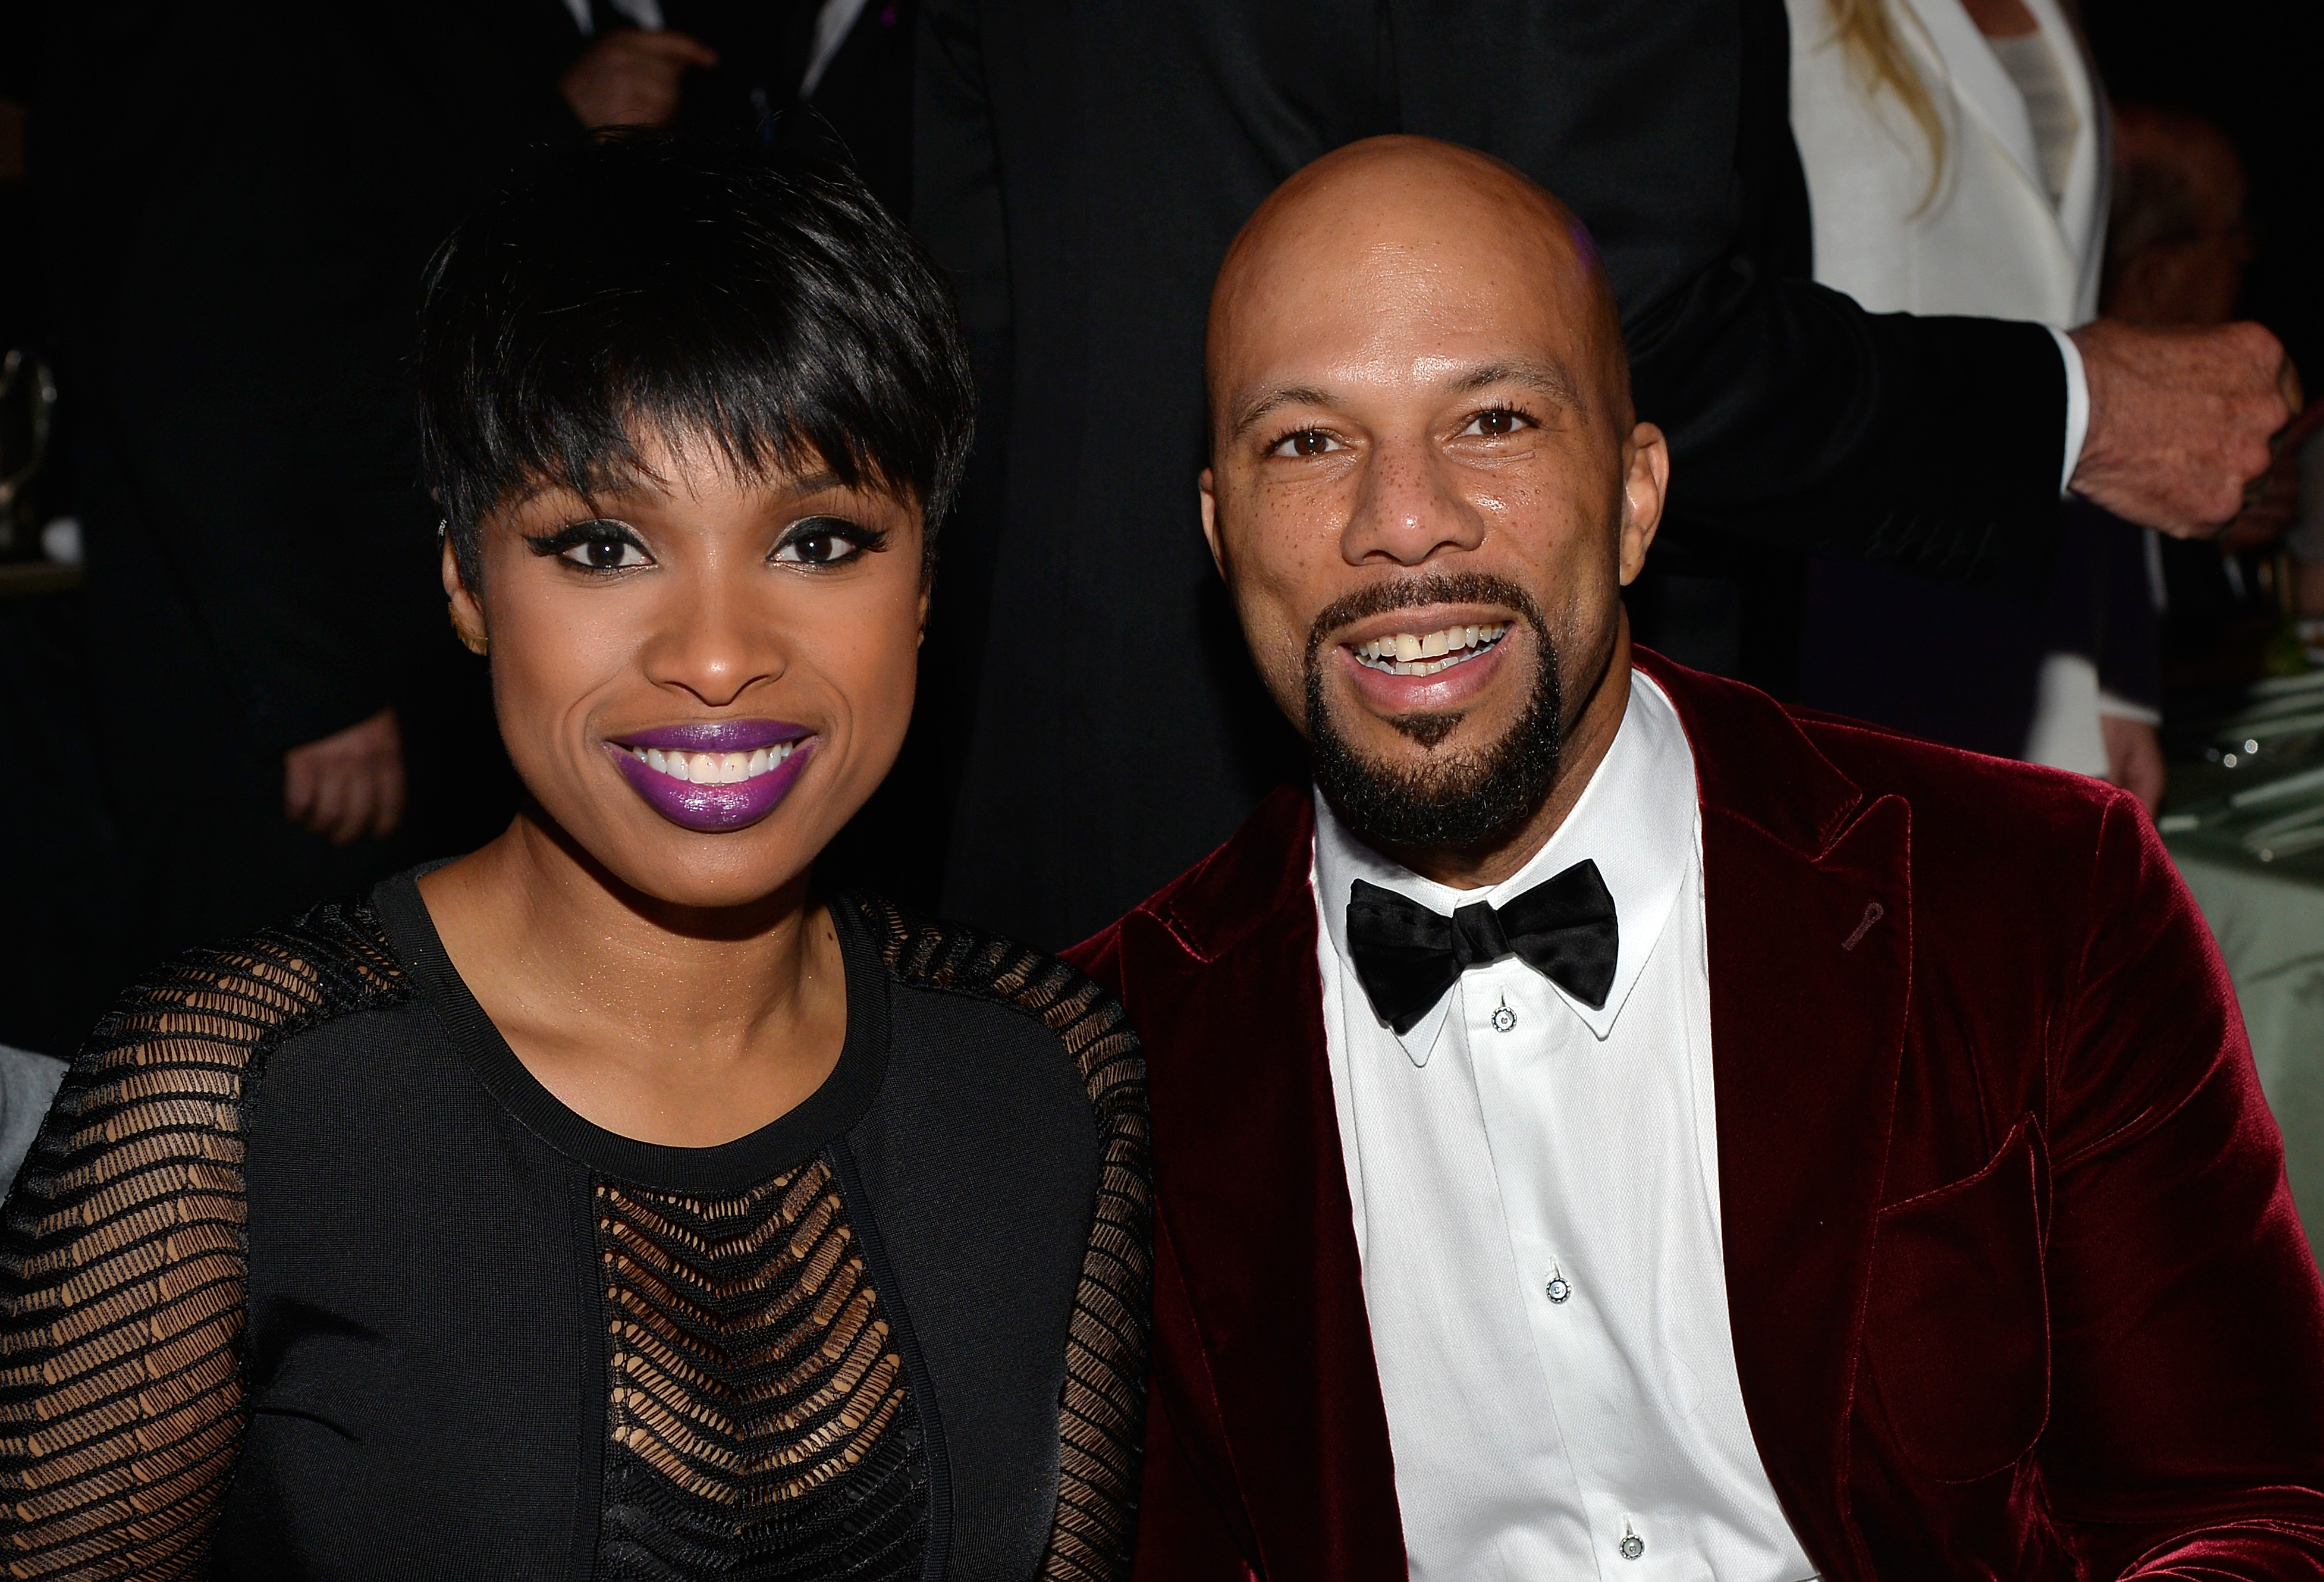 Jennifer Hudson & Common’s Relationship Still Going Strong, Couple Shows PDA During Chicago Stroll